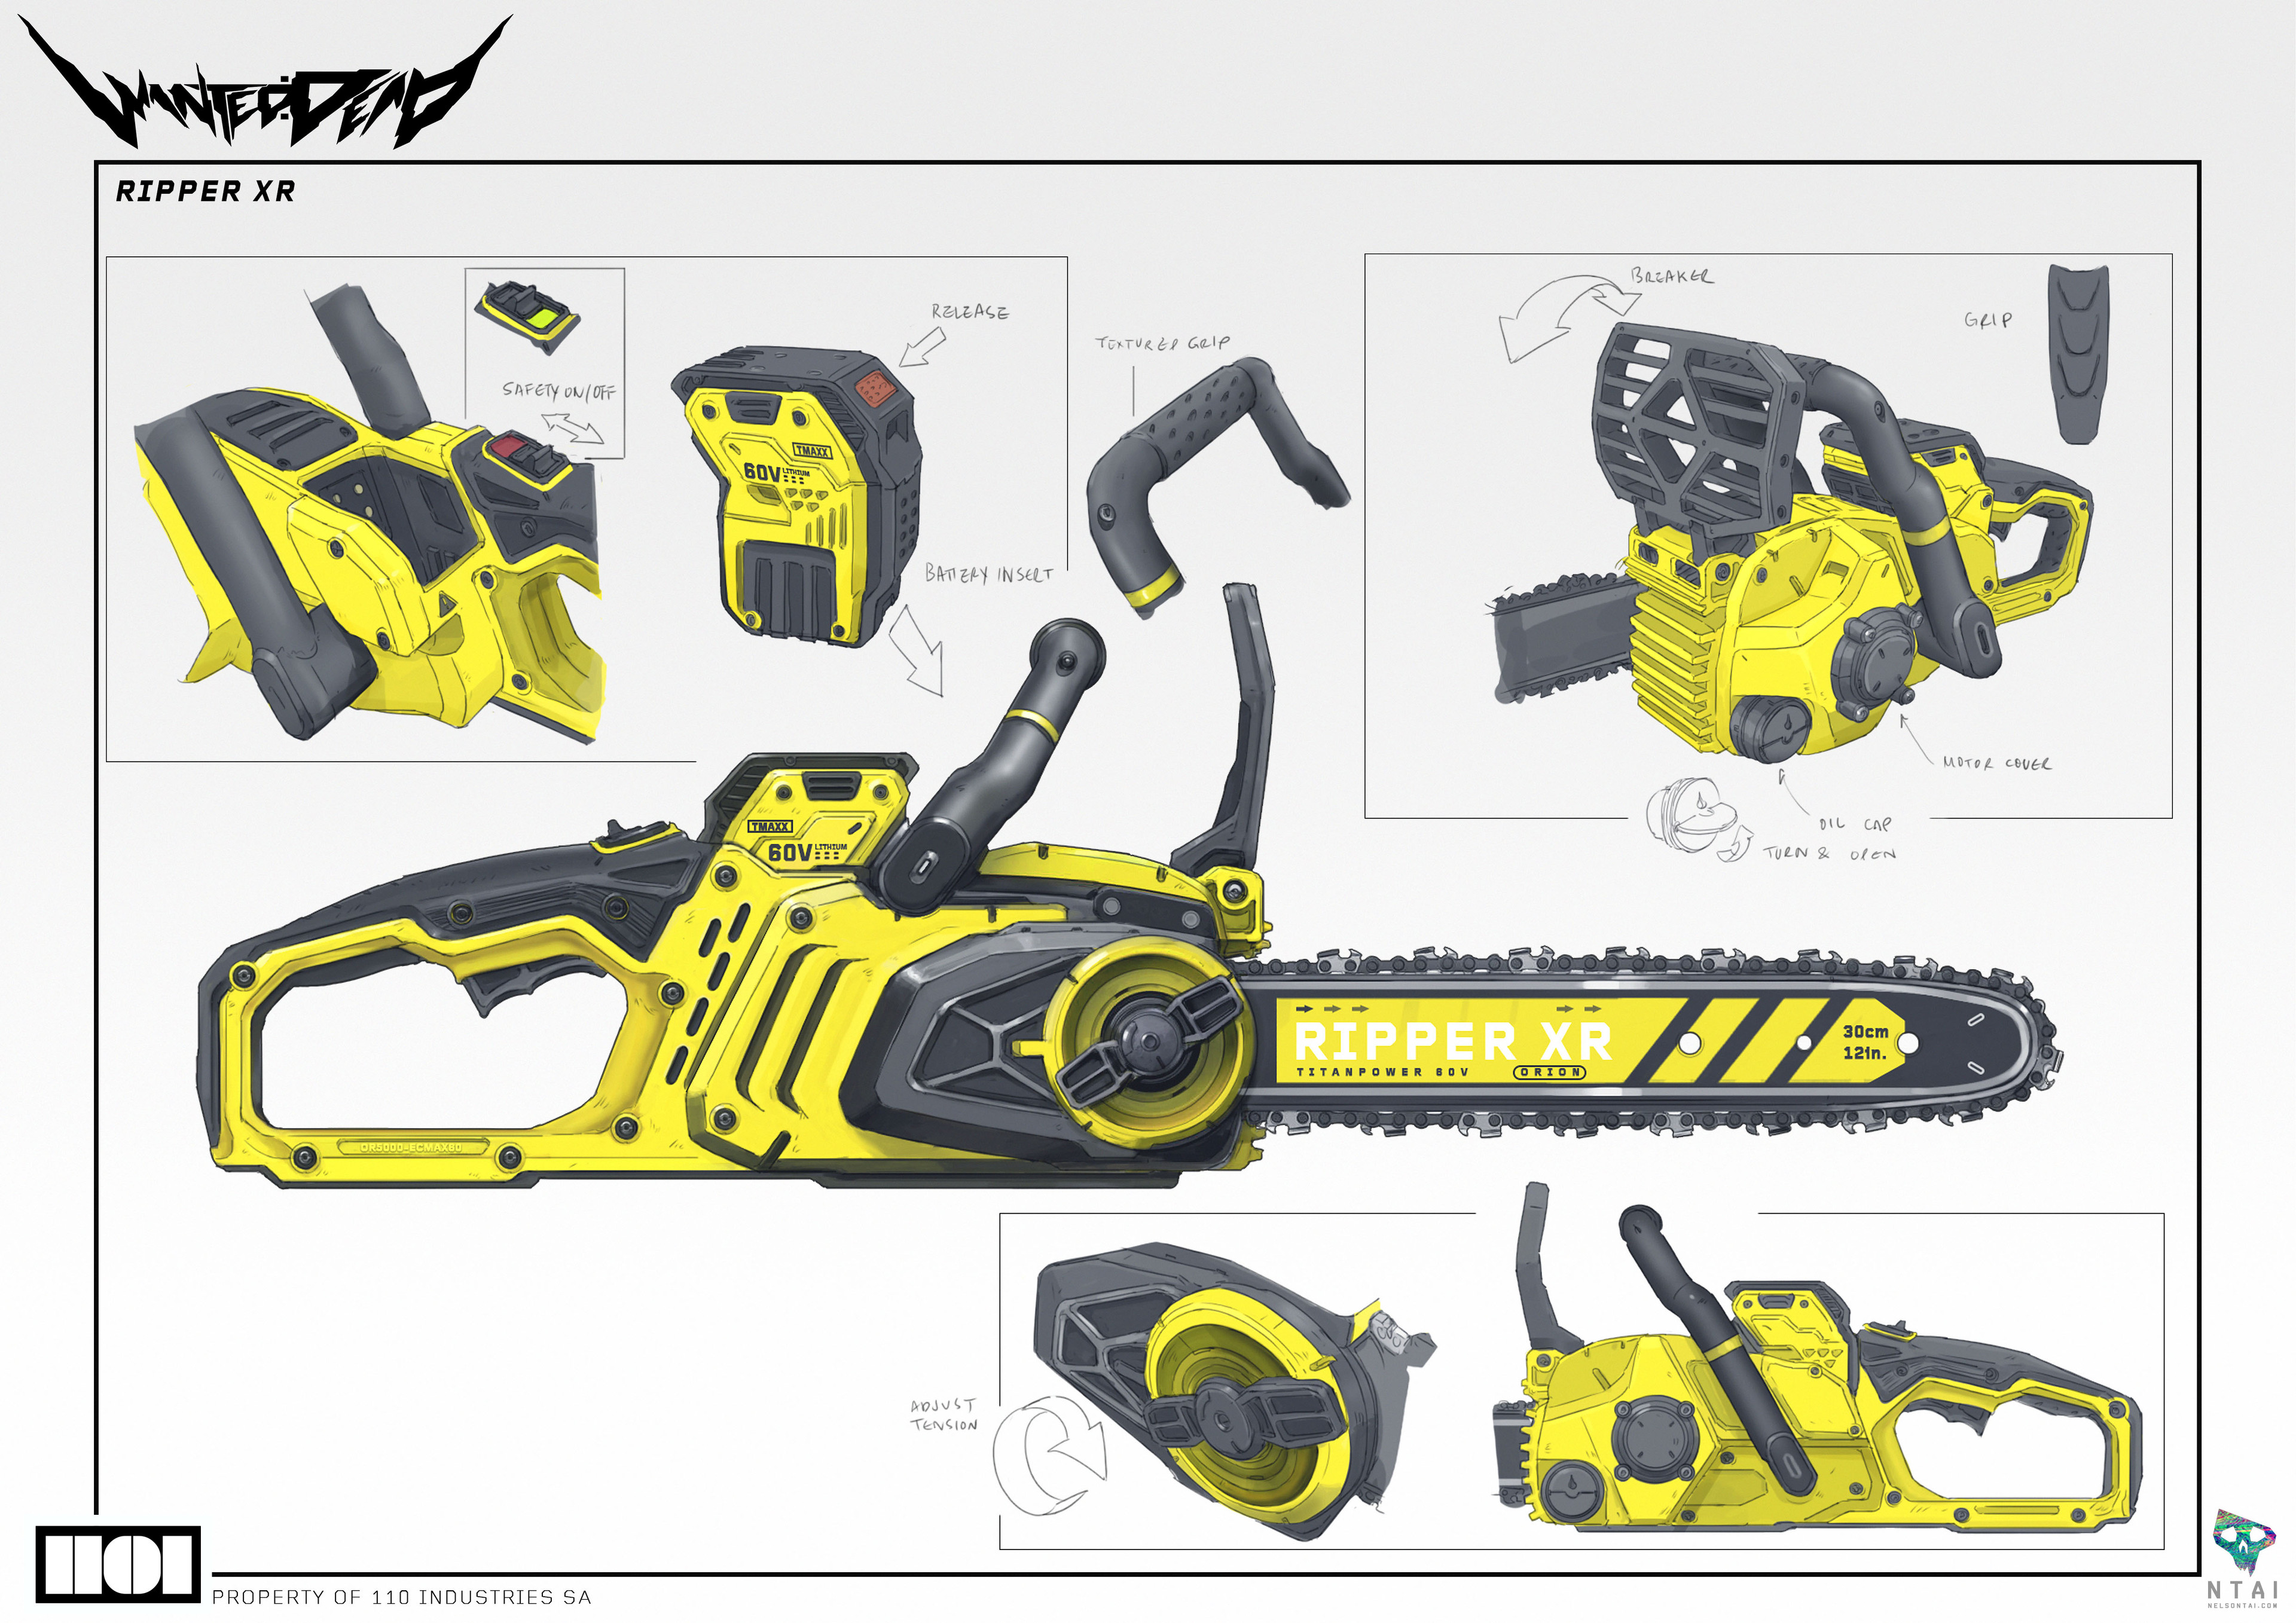 Weapon - Ripper XR. The Deadly Chainsaw